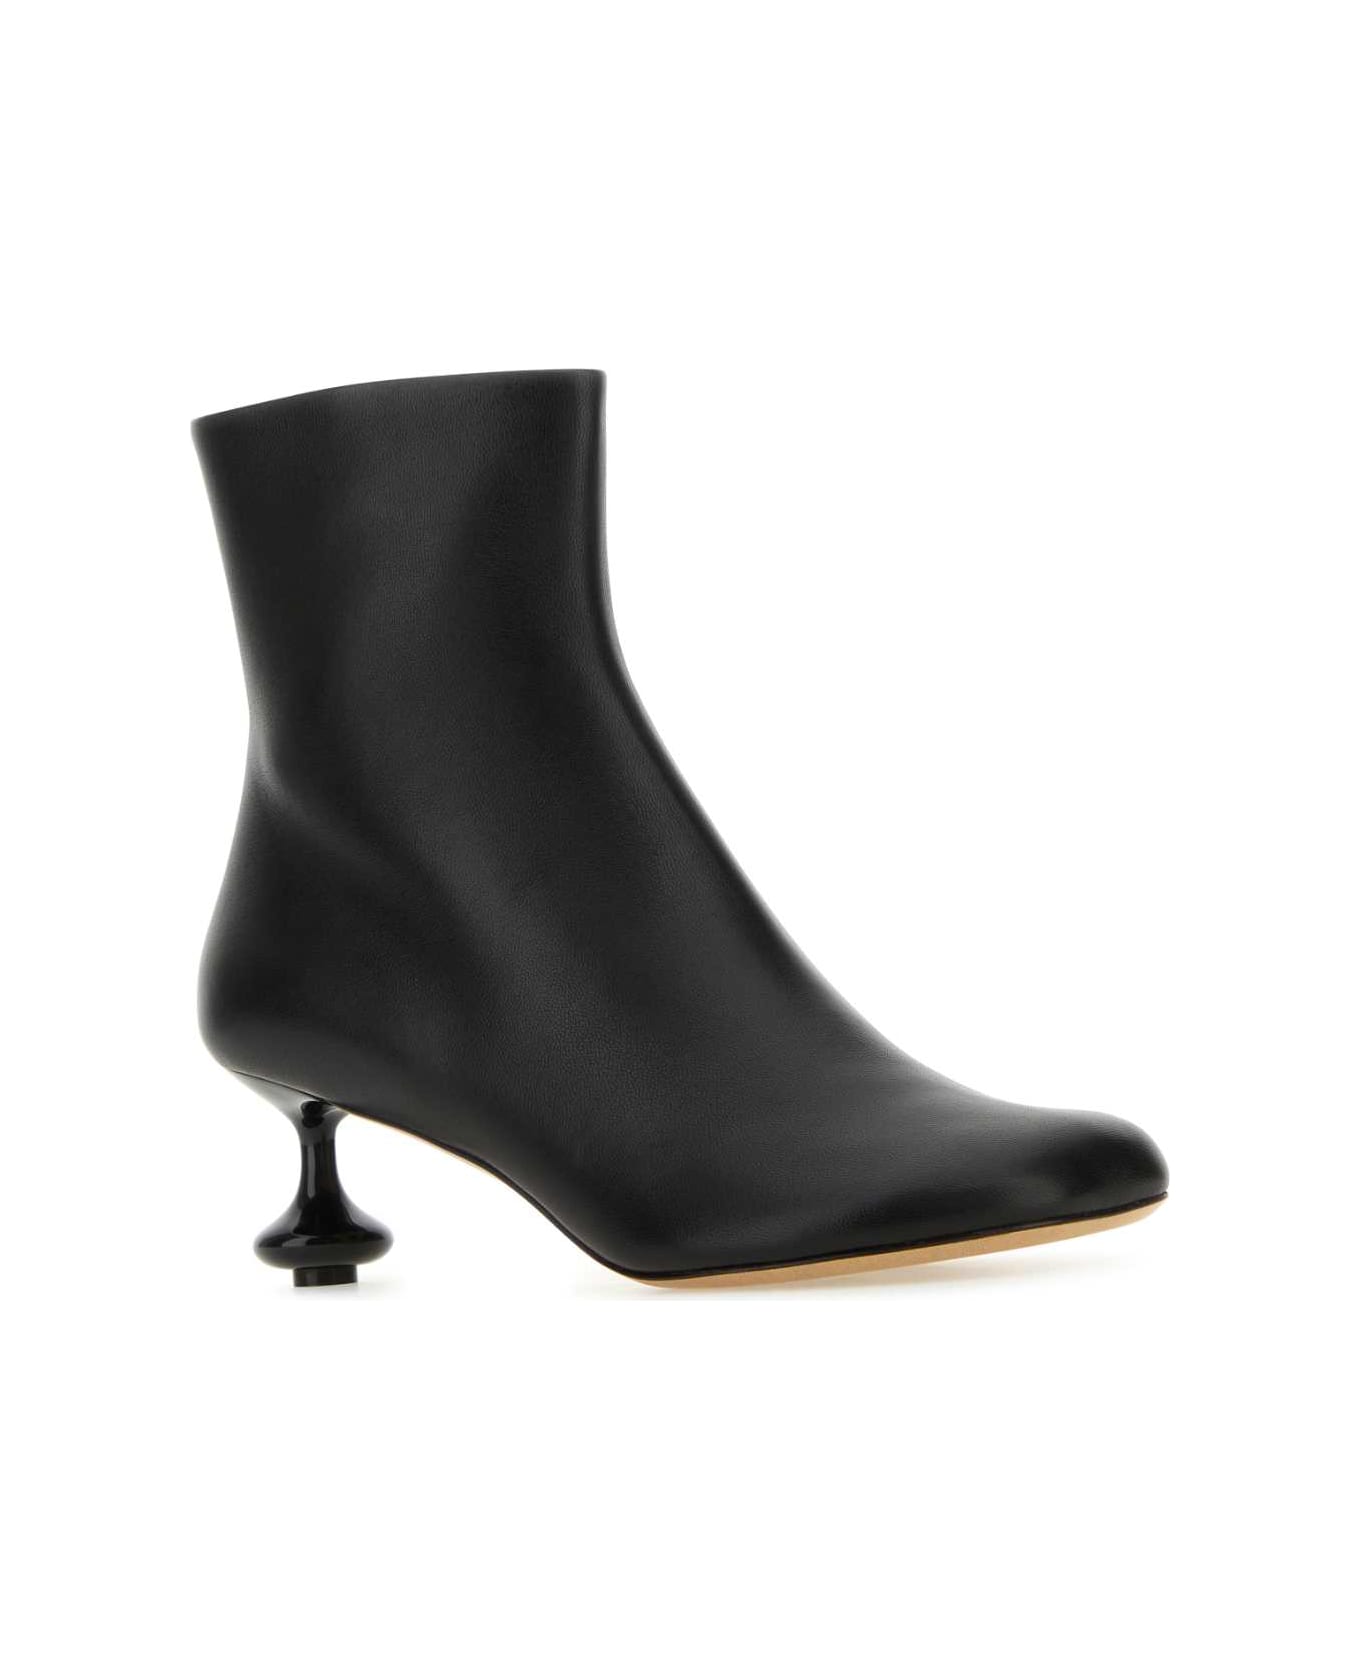 Loewe Black Nappa Leather Toy Ankle Boots - BLACK ブーツ